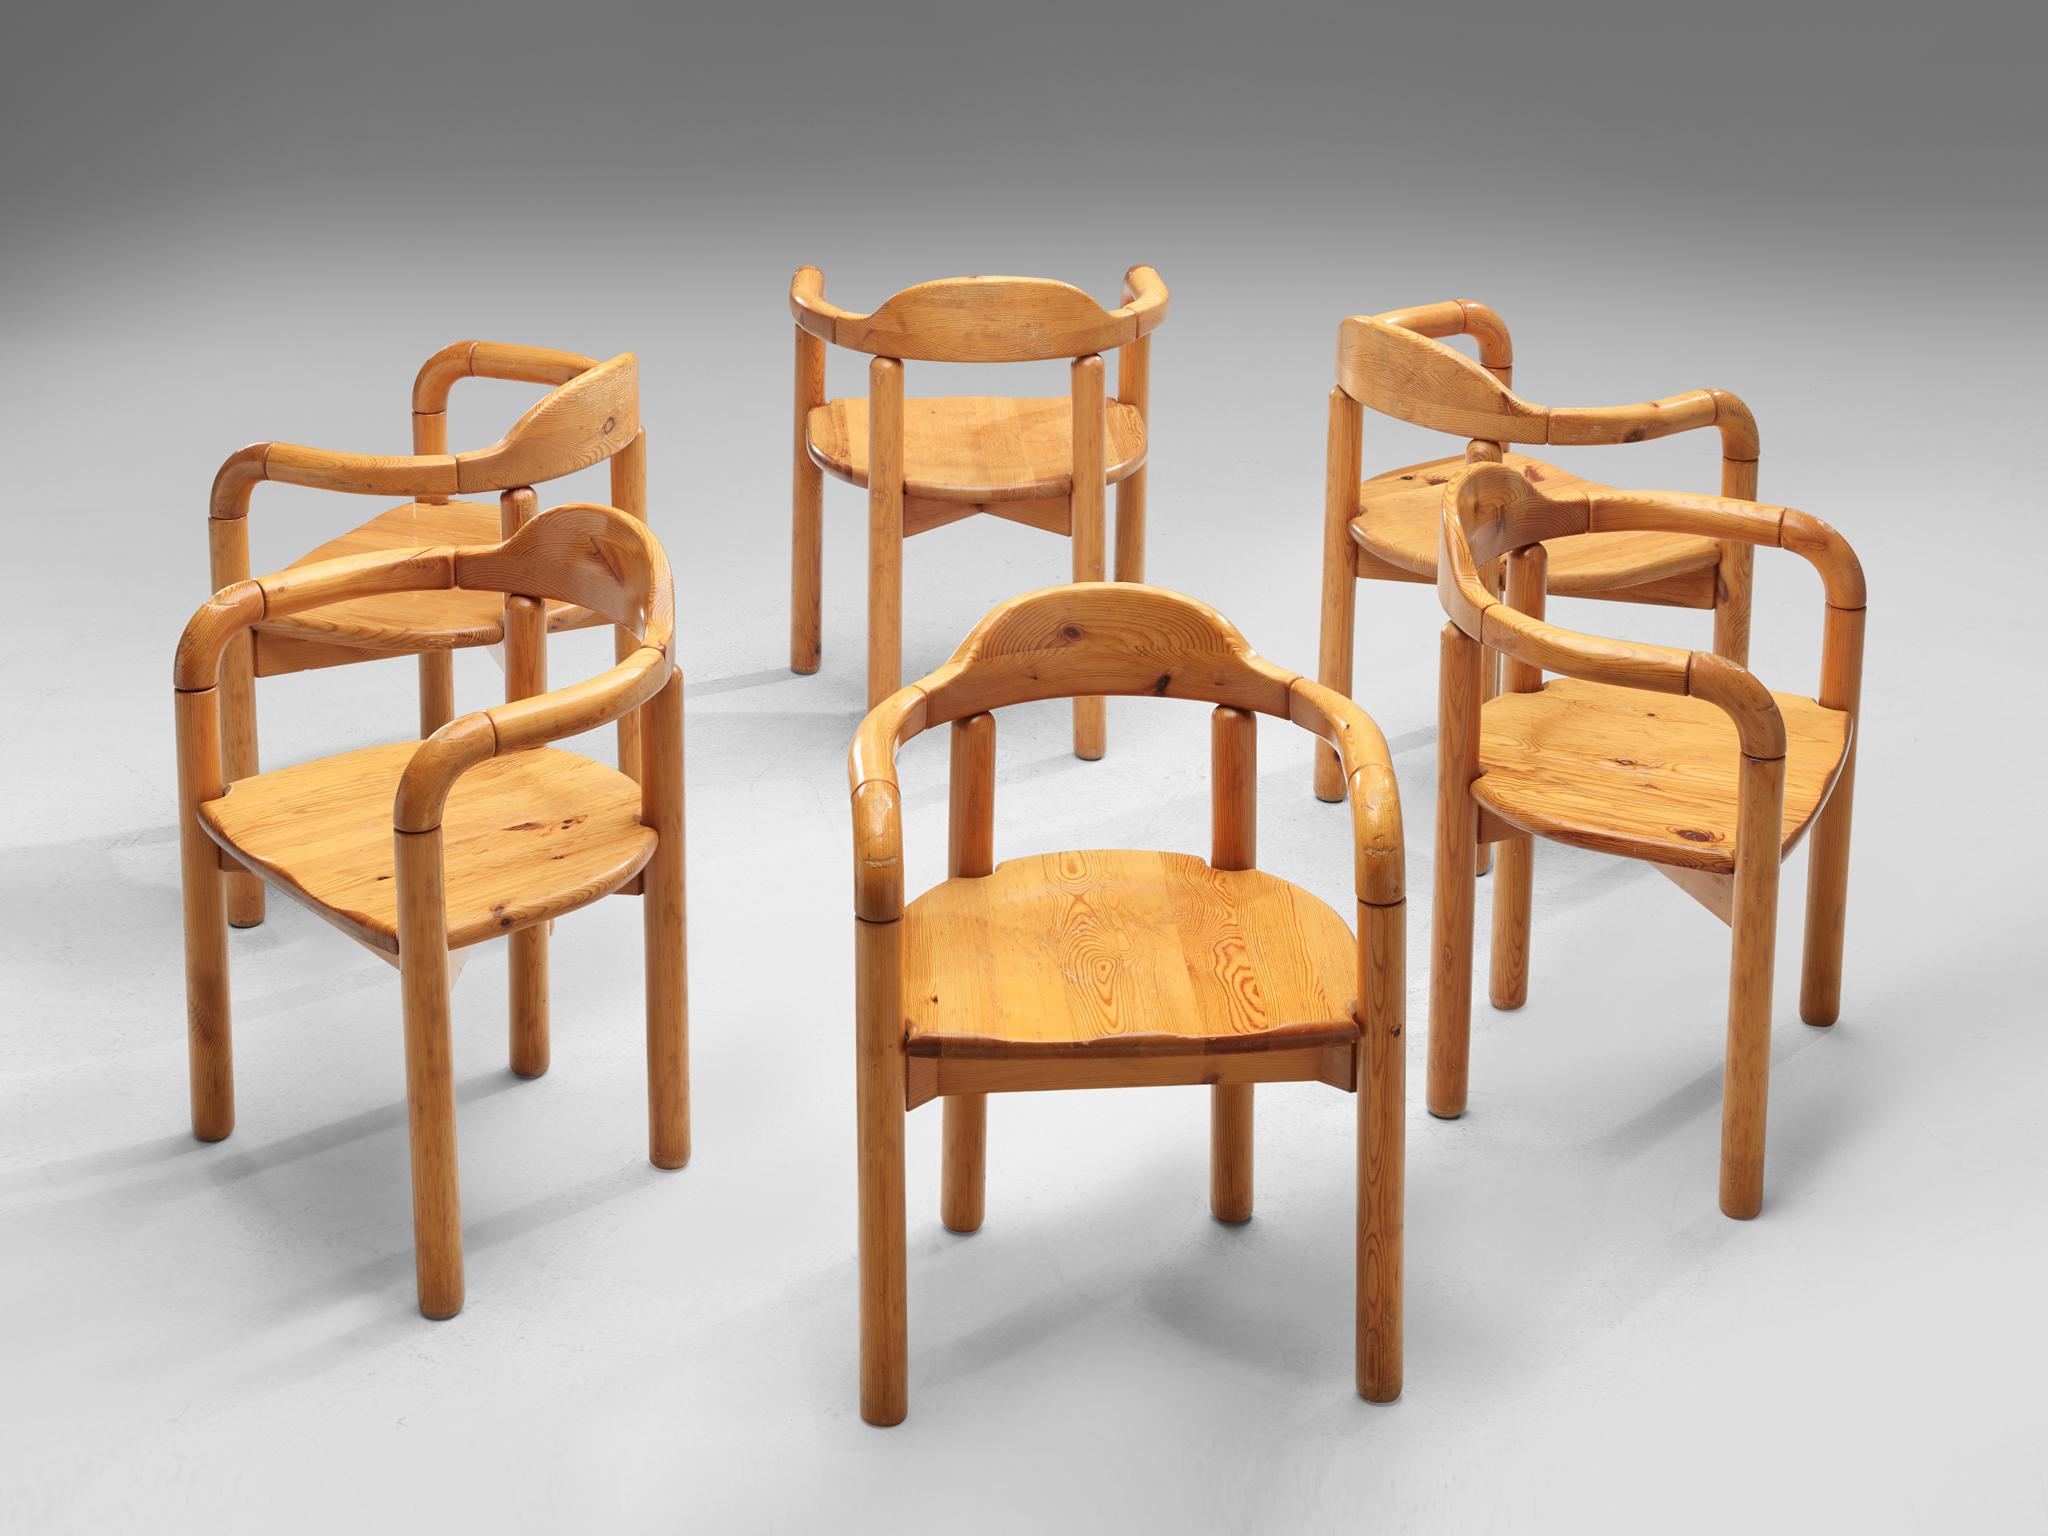 Rainer Daumiller for Hirtshals Savvaerk, set of six armchairs, pine, Denmark, 1970s.

Beautiful set of six organic and natural armchairs in solid pine. A simplistic design with a round seating and full attention for the natural expression and grain